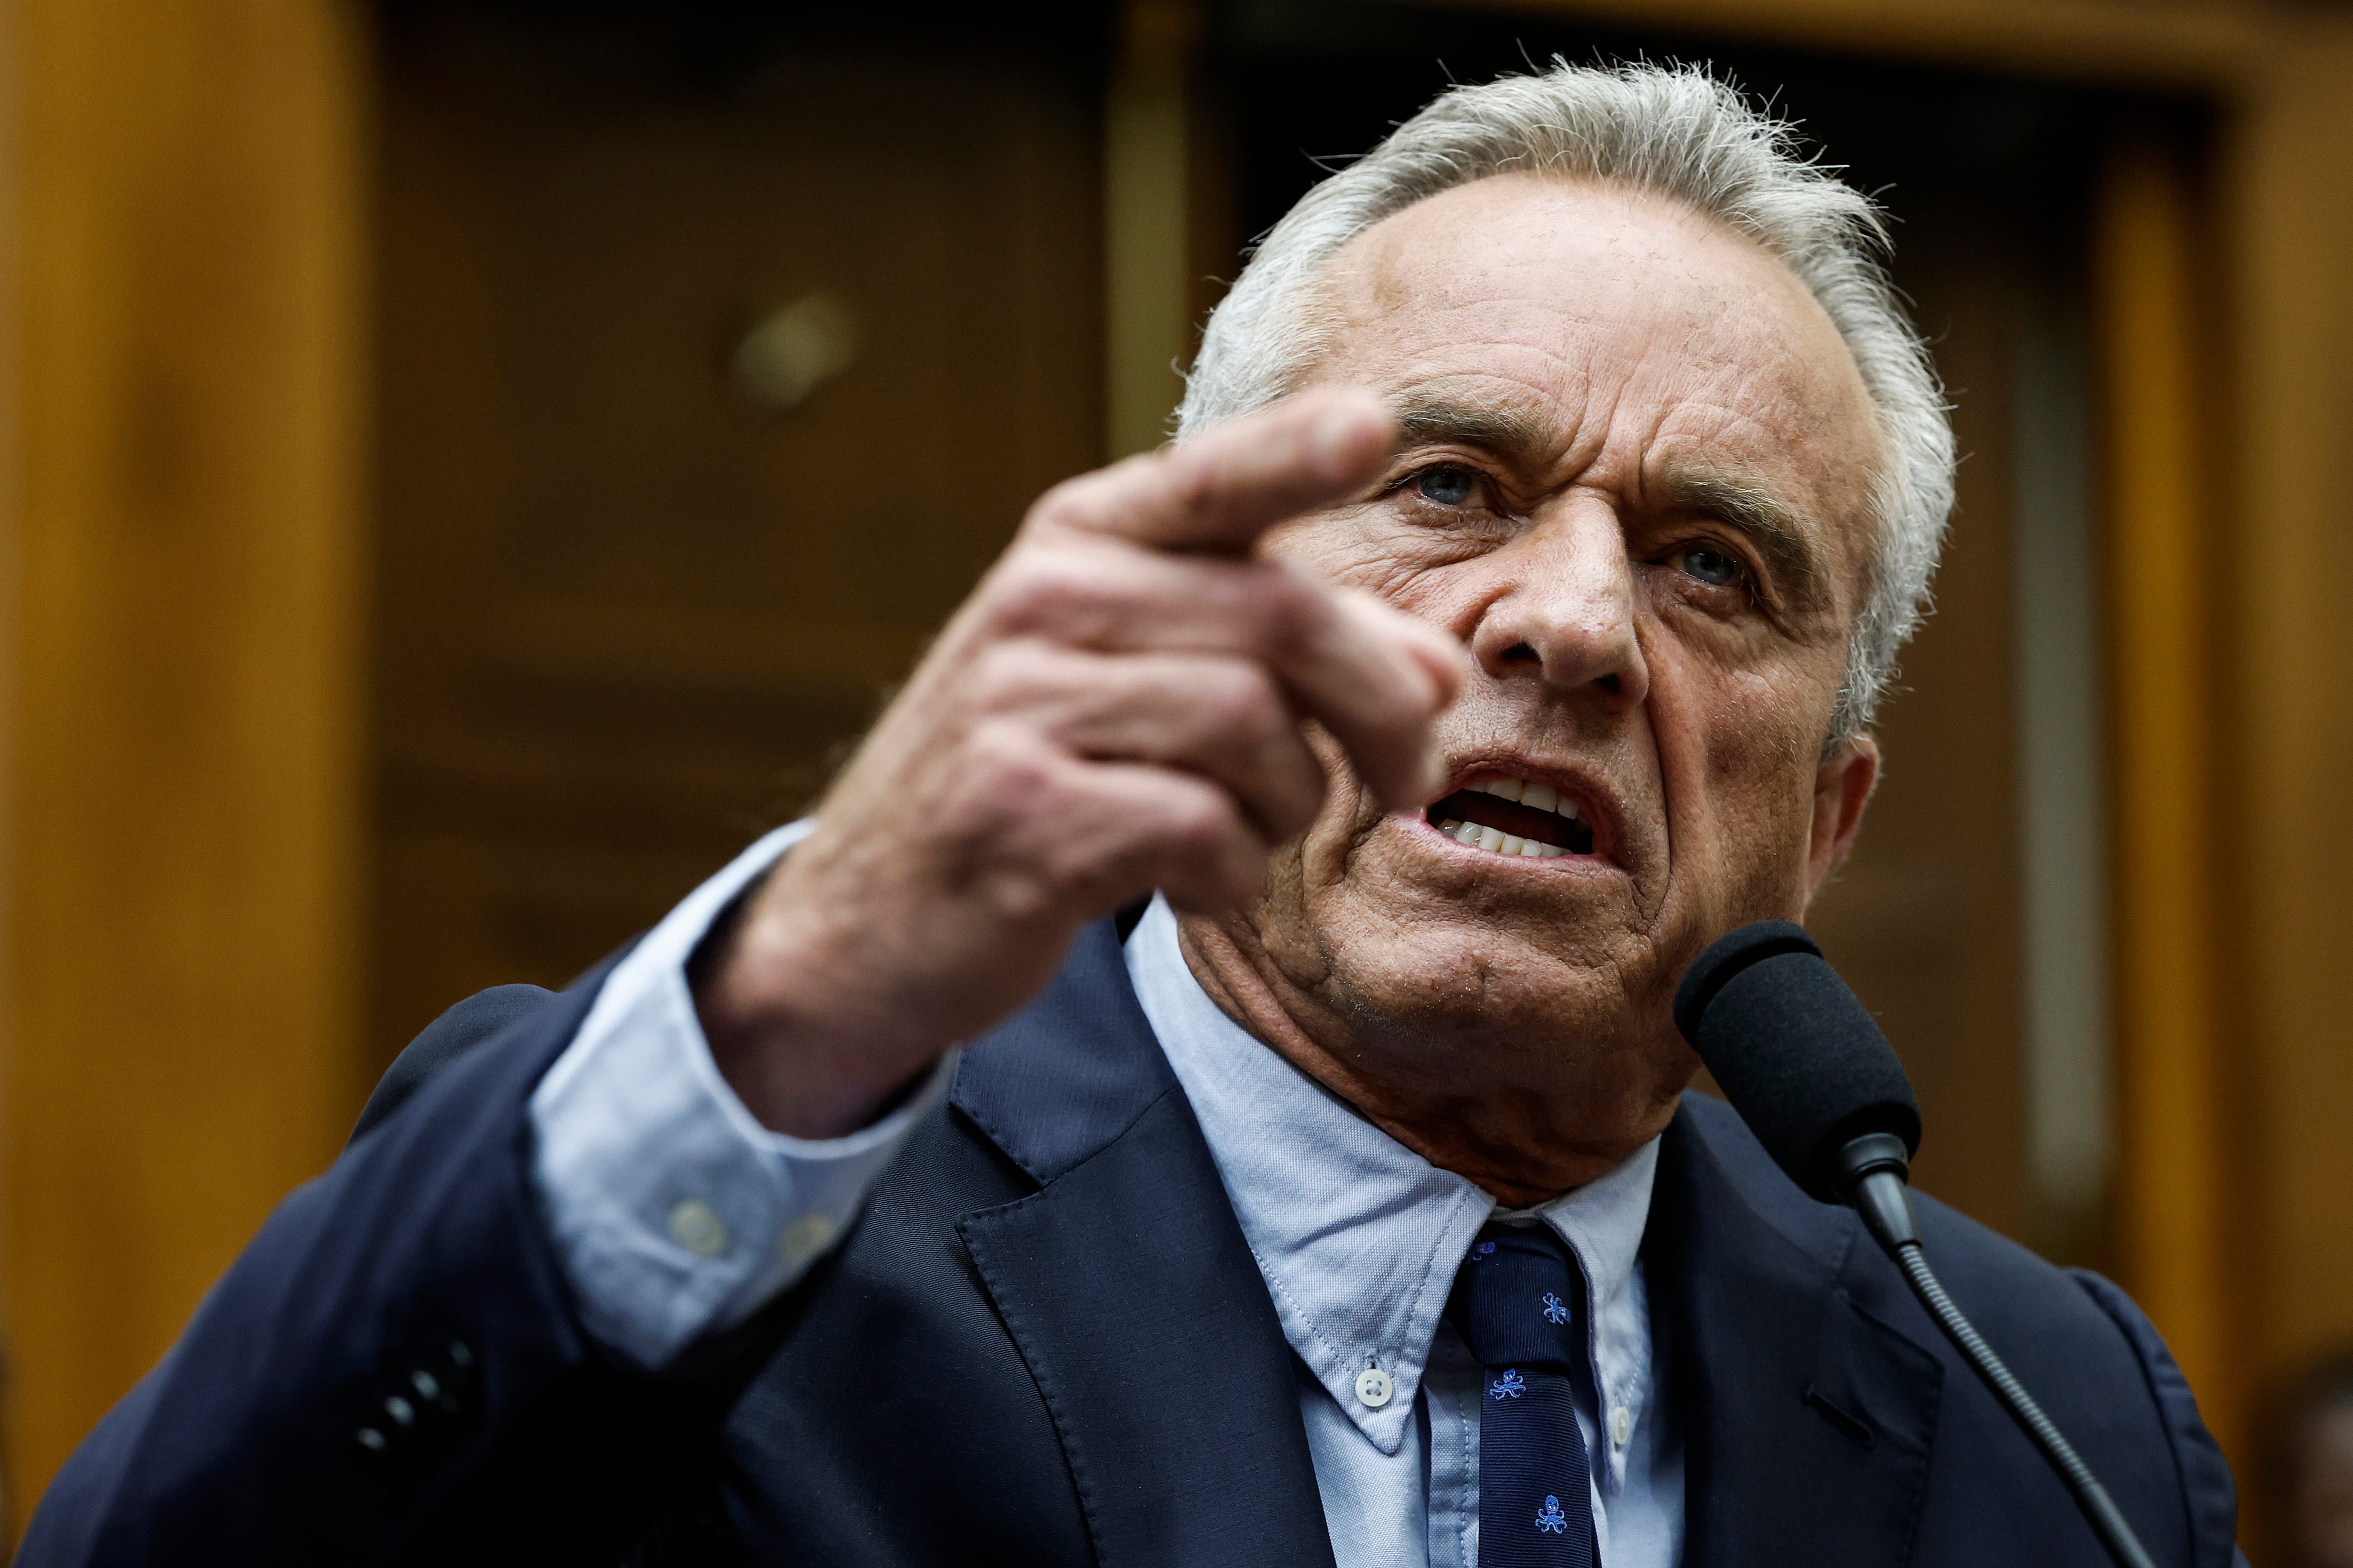 RFK Jr. warns government censorship could open door to 'atrocity' days after face-off with House Democrats